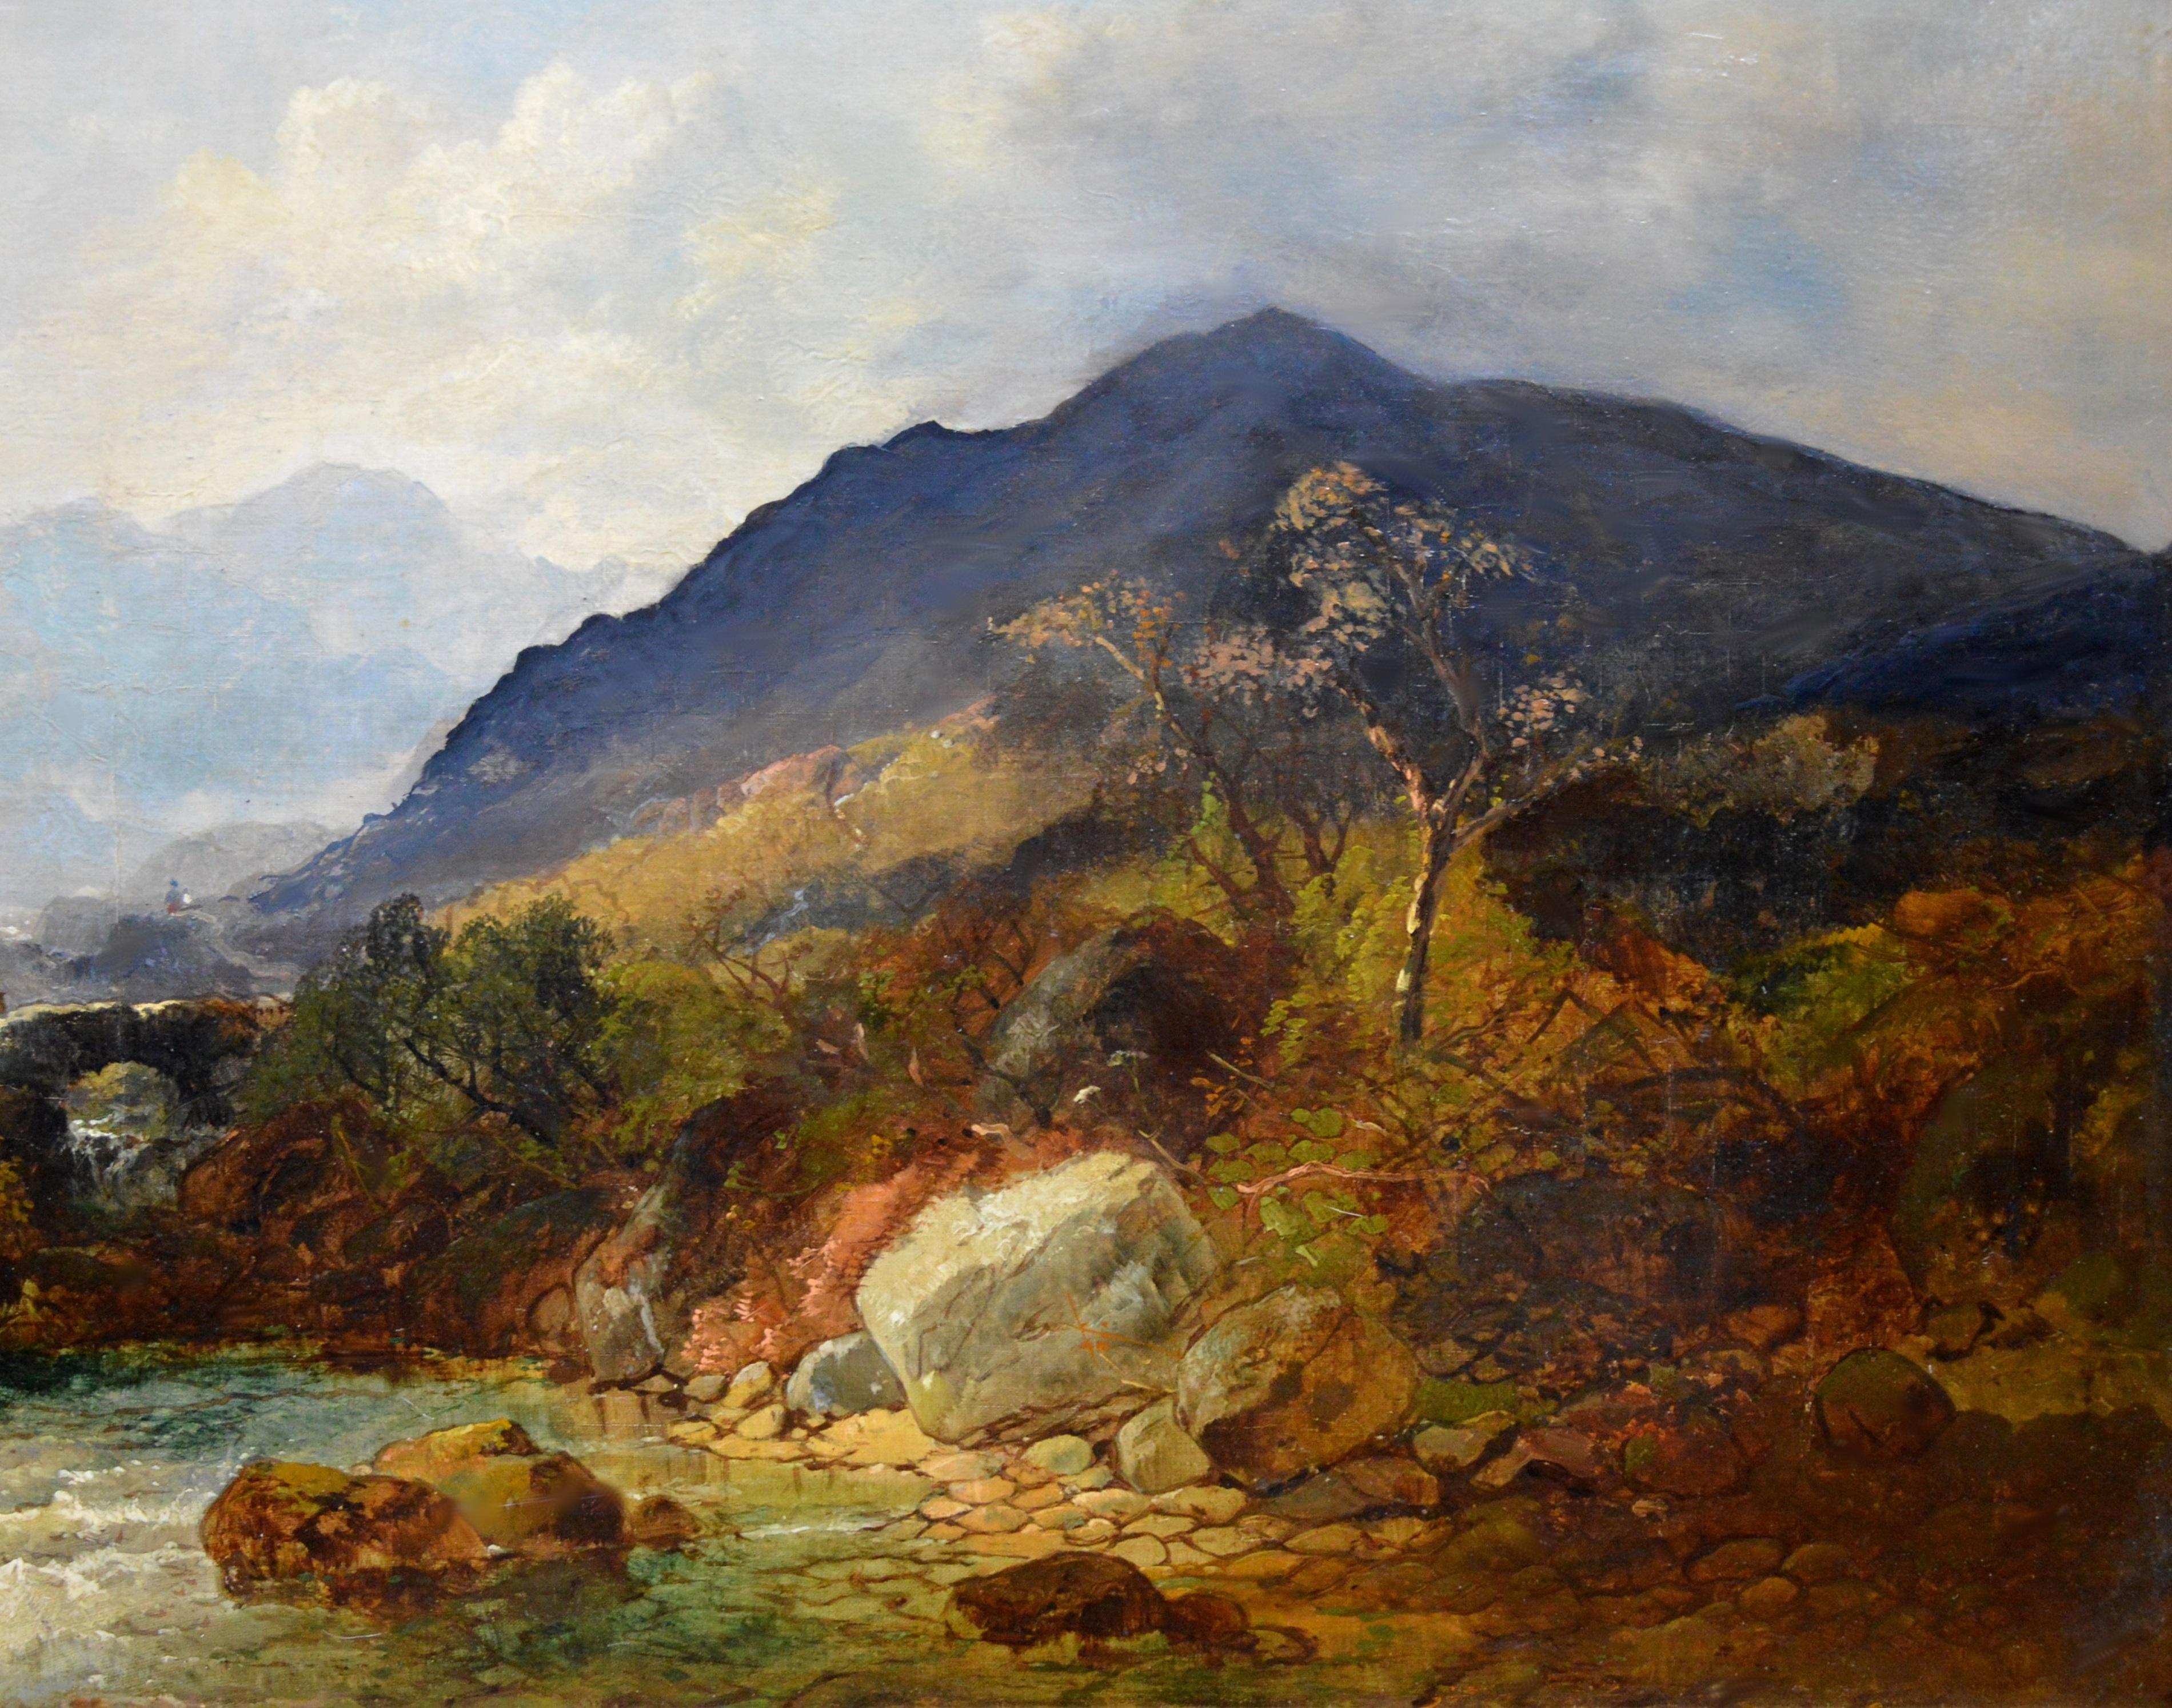 This is a very large fine 19th century oil on canvas depicting a figure herding cows across a stone bridge before the mountain of ‘Snowdon, North Wales’ by the renowned Victorian landscape artist Joseph Horlor (1809-1887). The painting is signed by